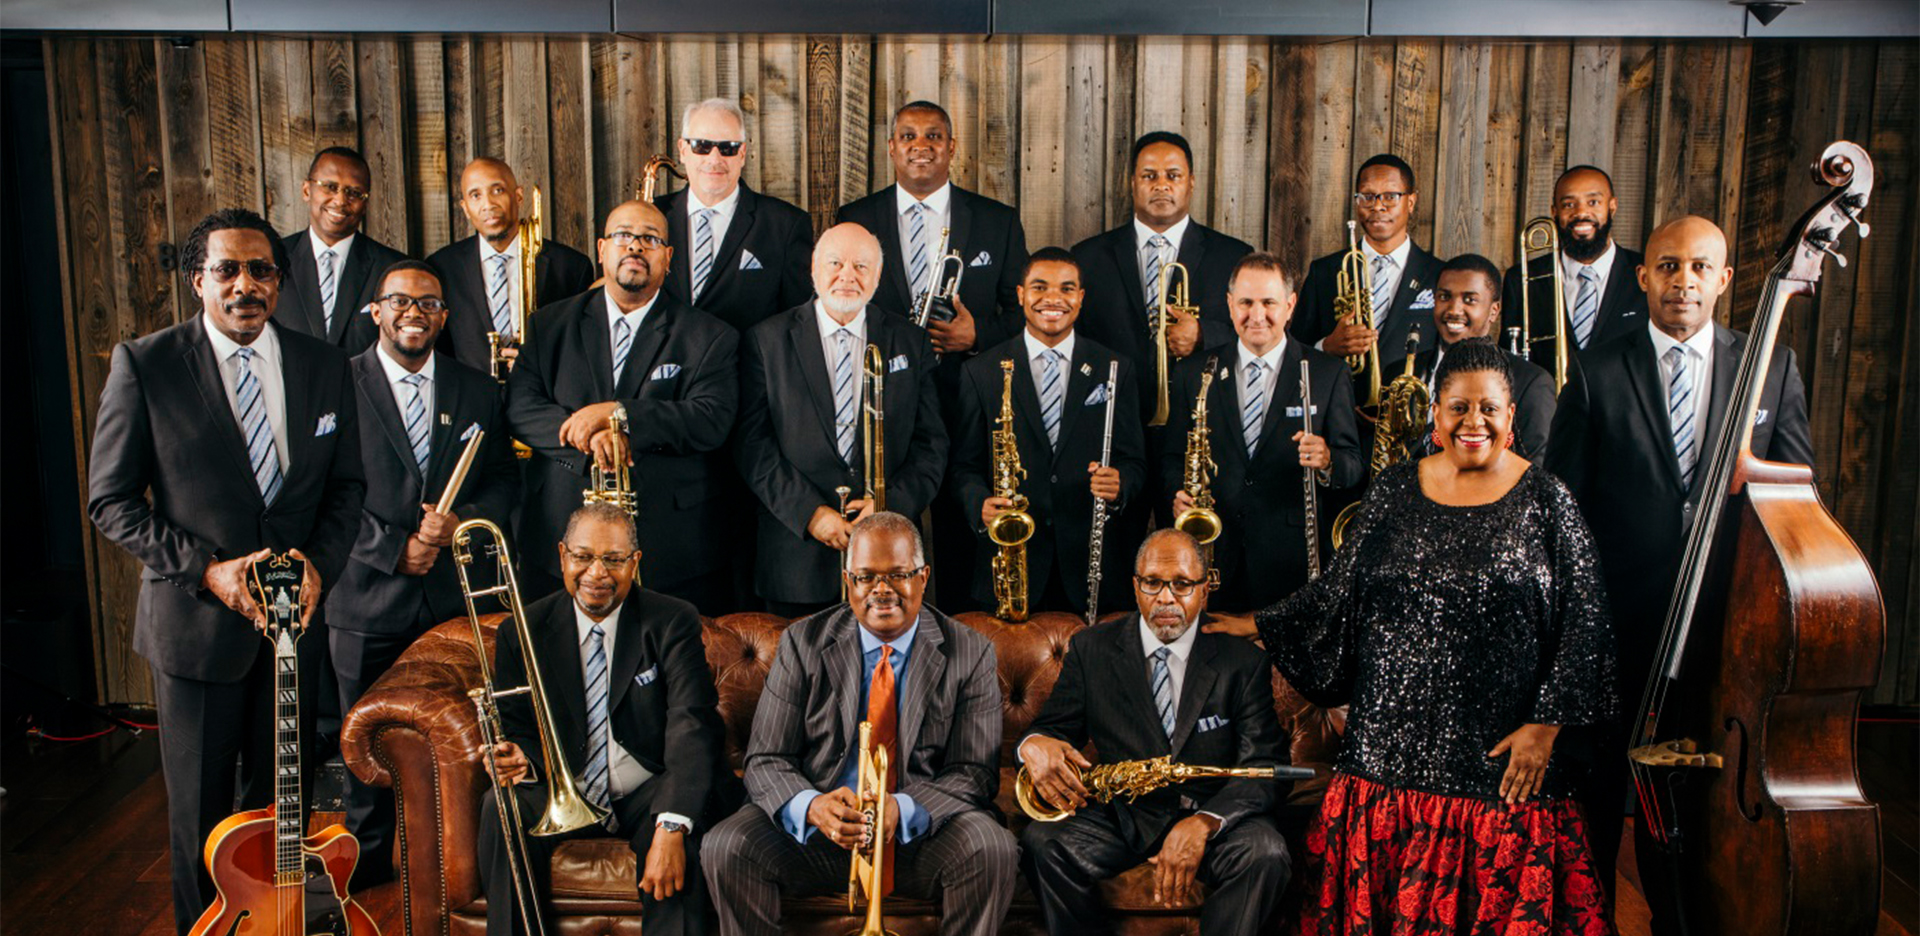 The Legendary Count Basie Orchestra Image